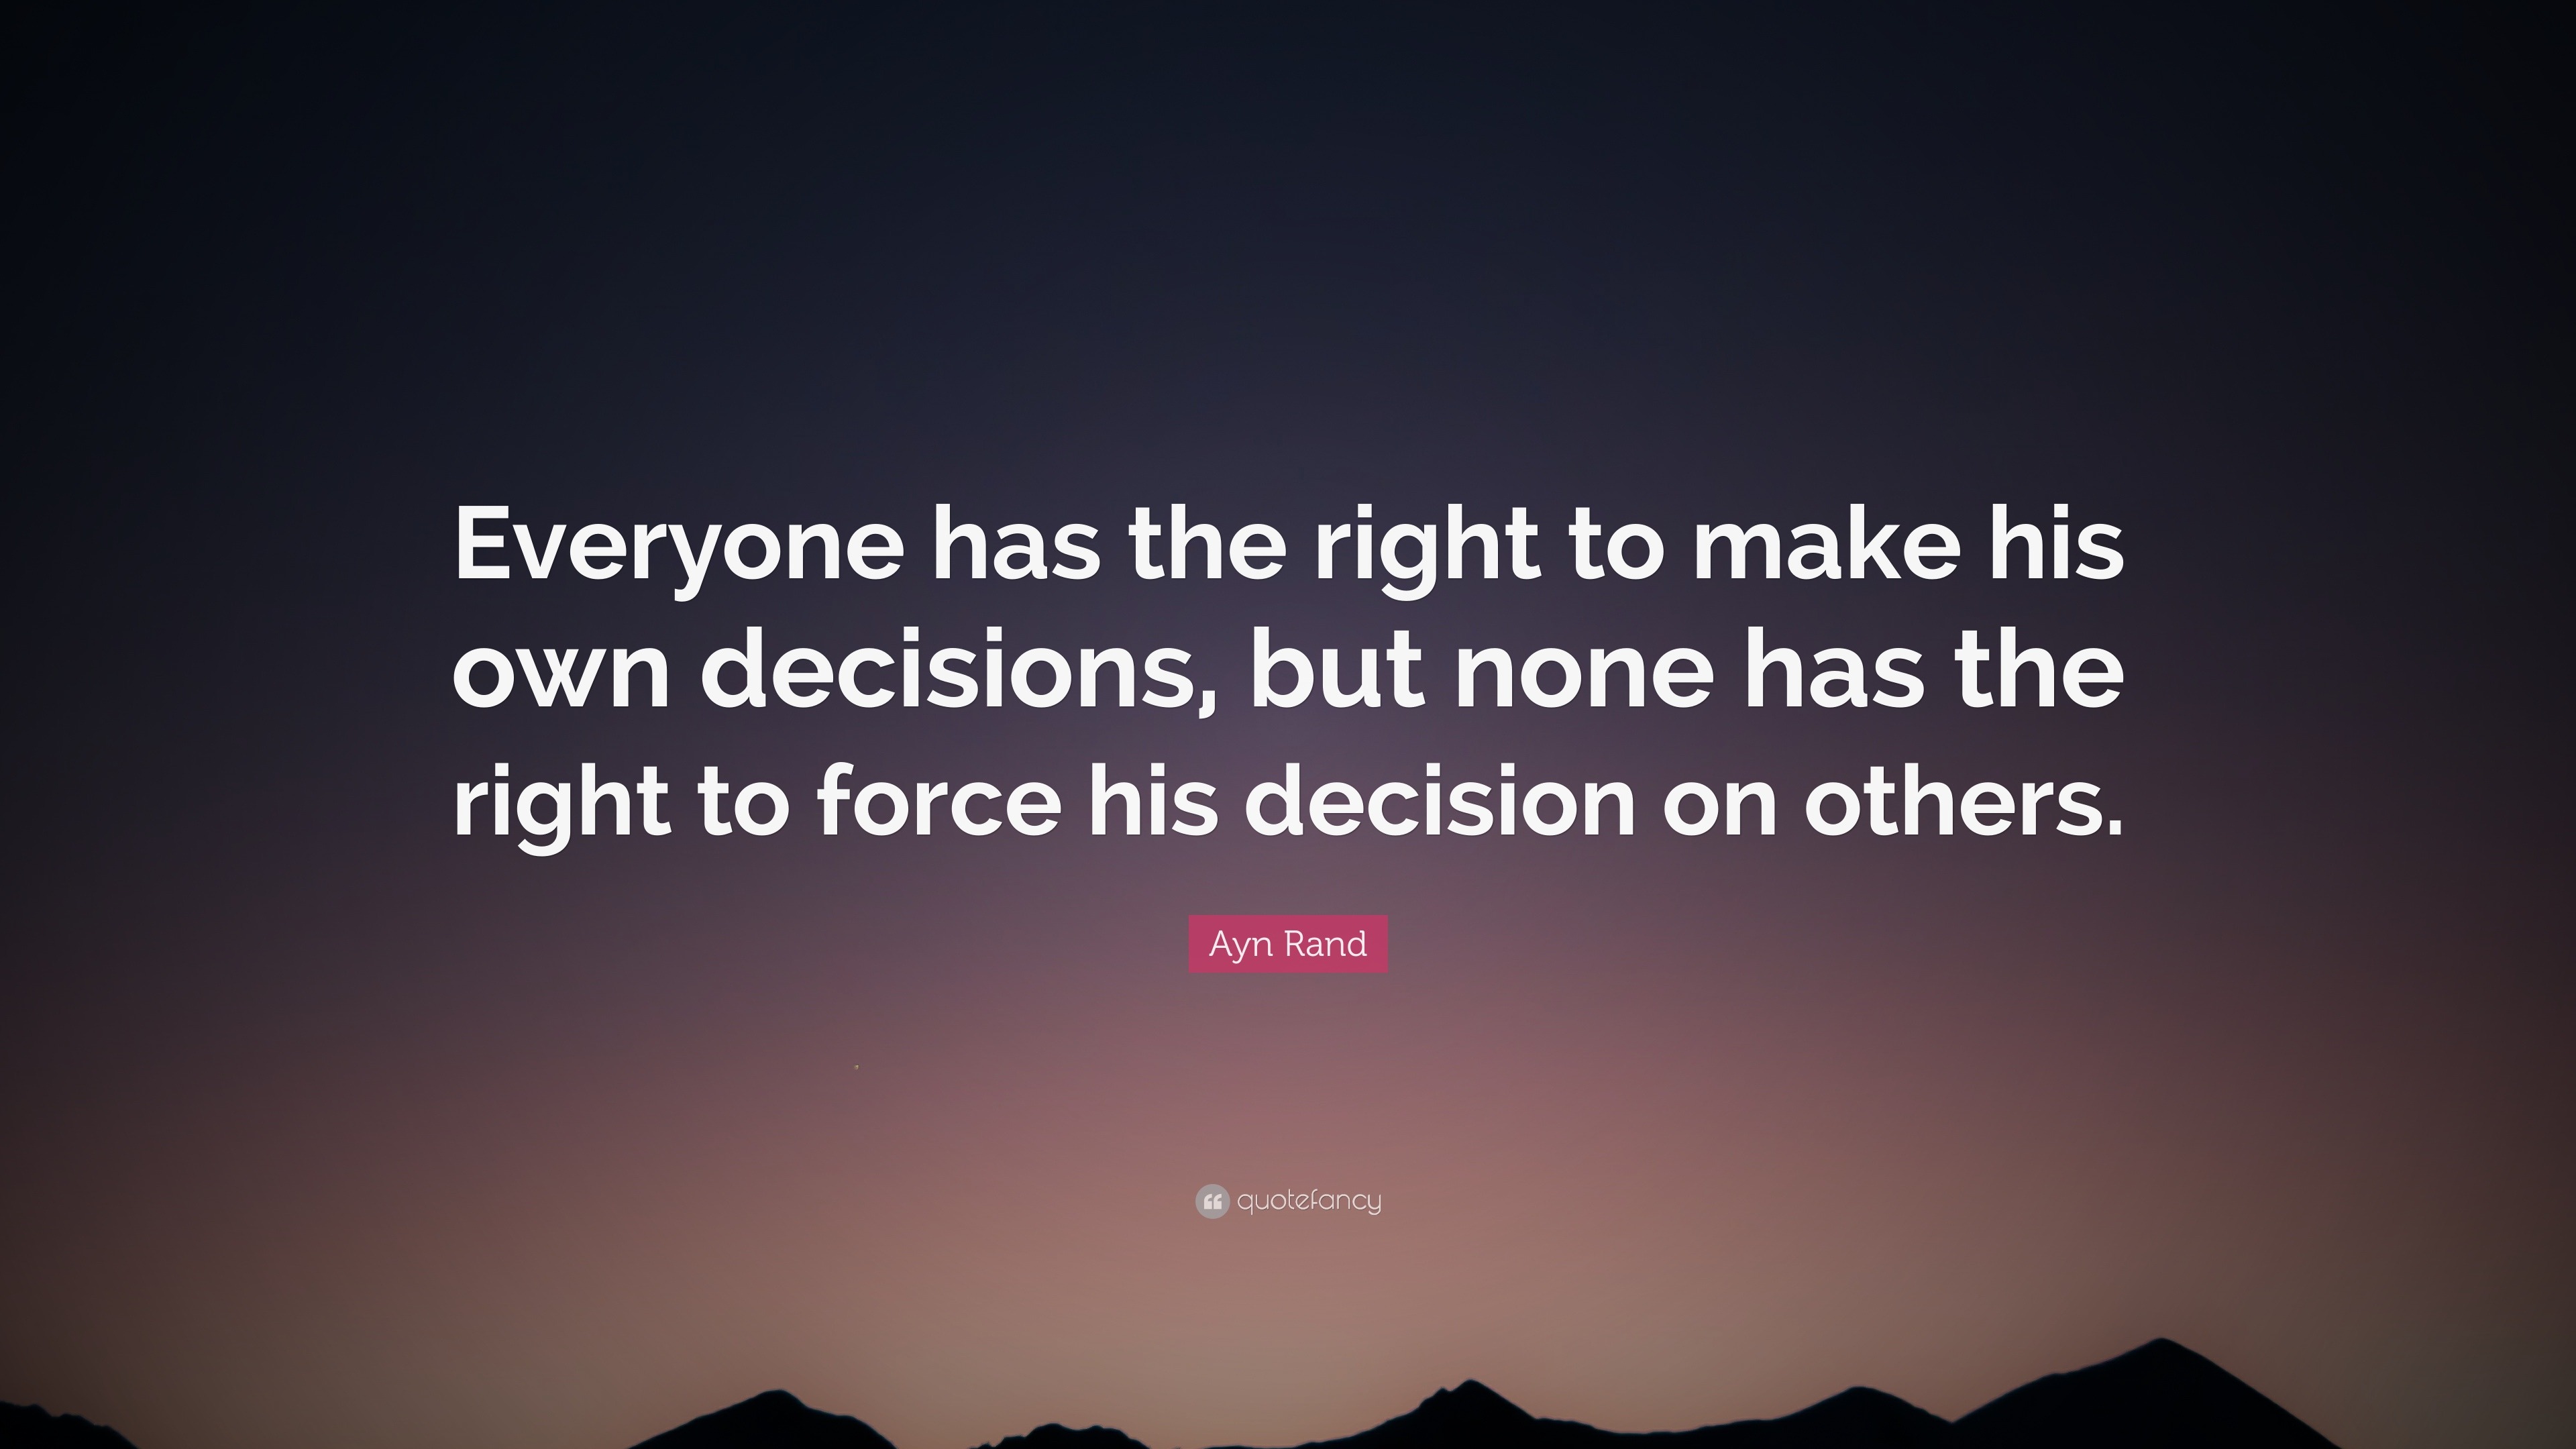 Ayn Rand Quote Everyone Has The Right To Make His Own Decisions But None Has The